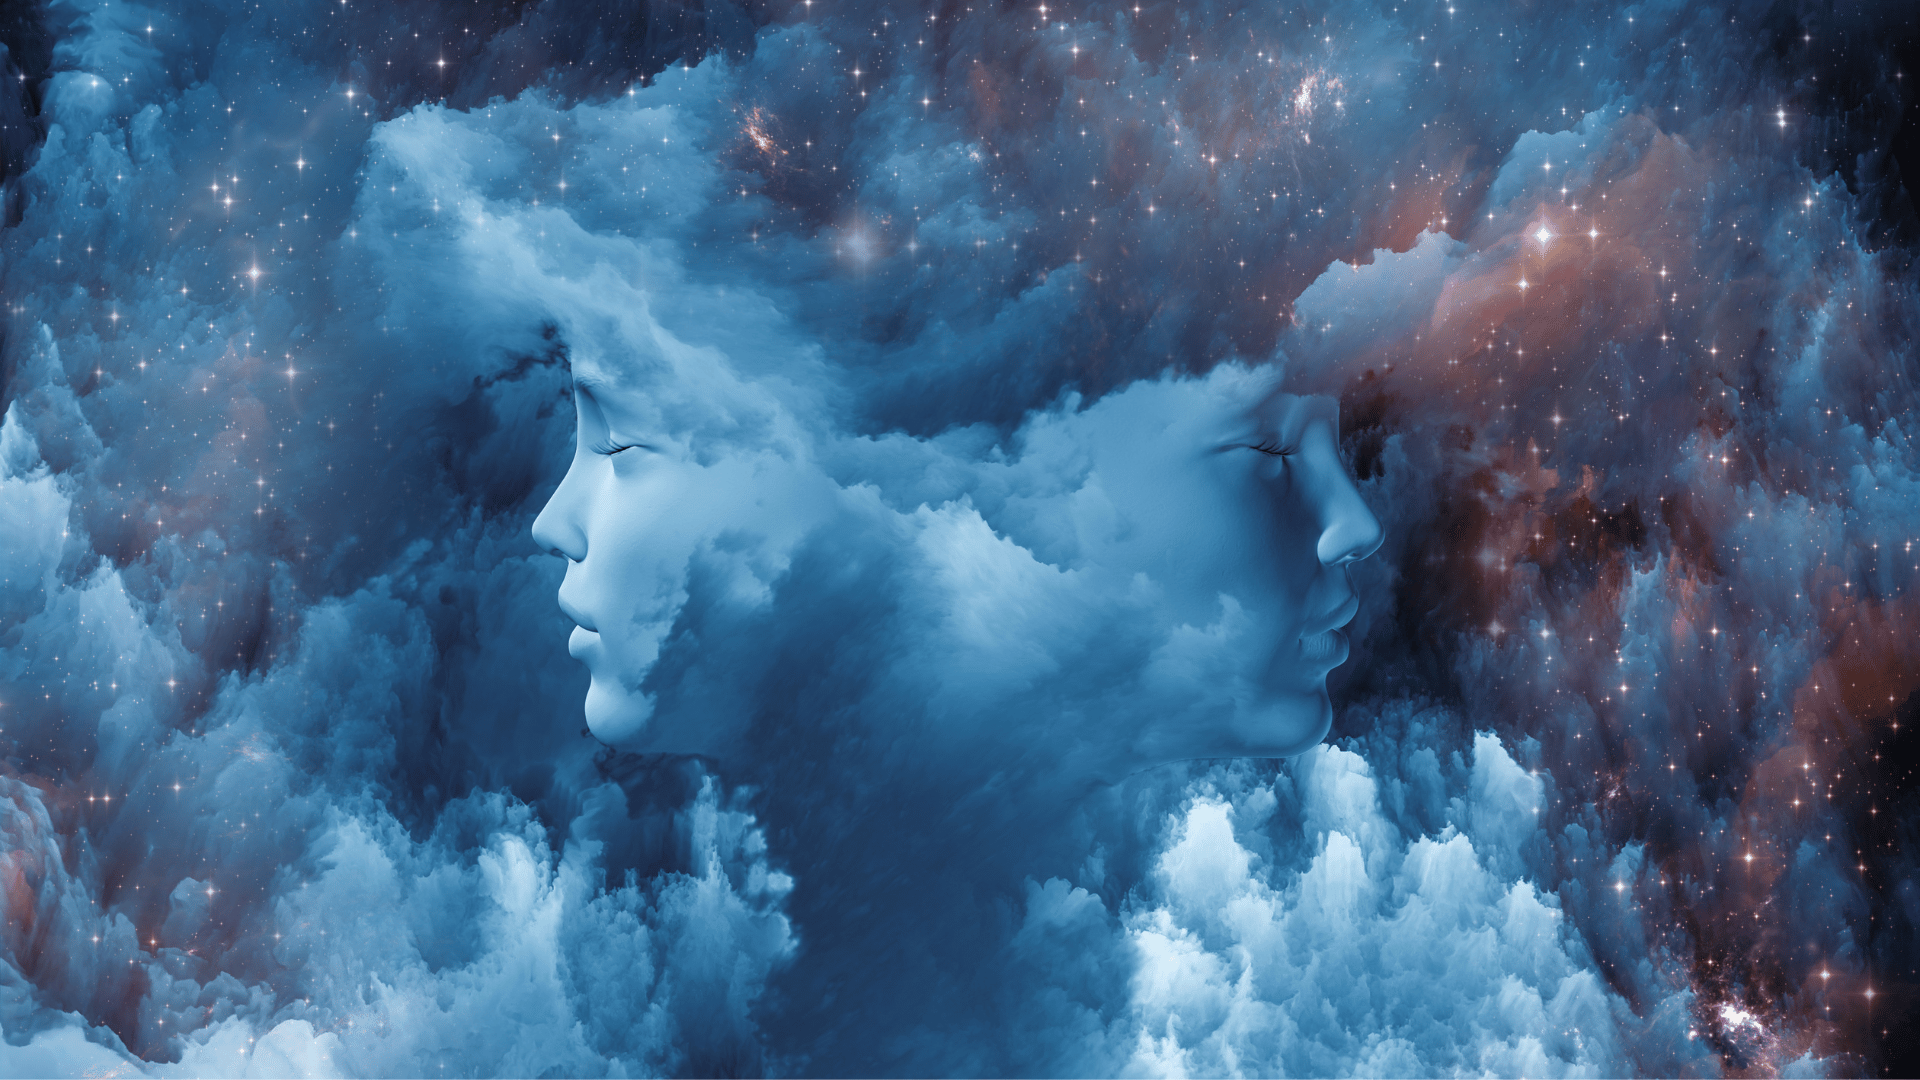 Illustration of a dream face of a child amongst a night sky of clouds